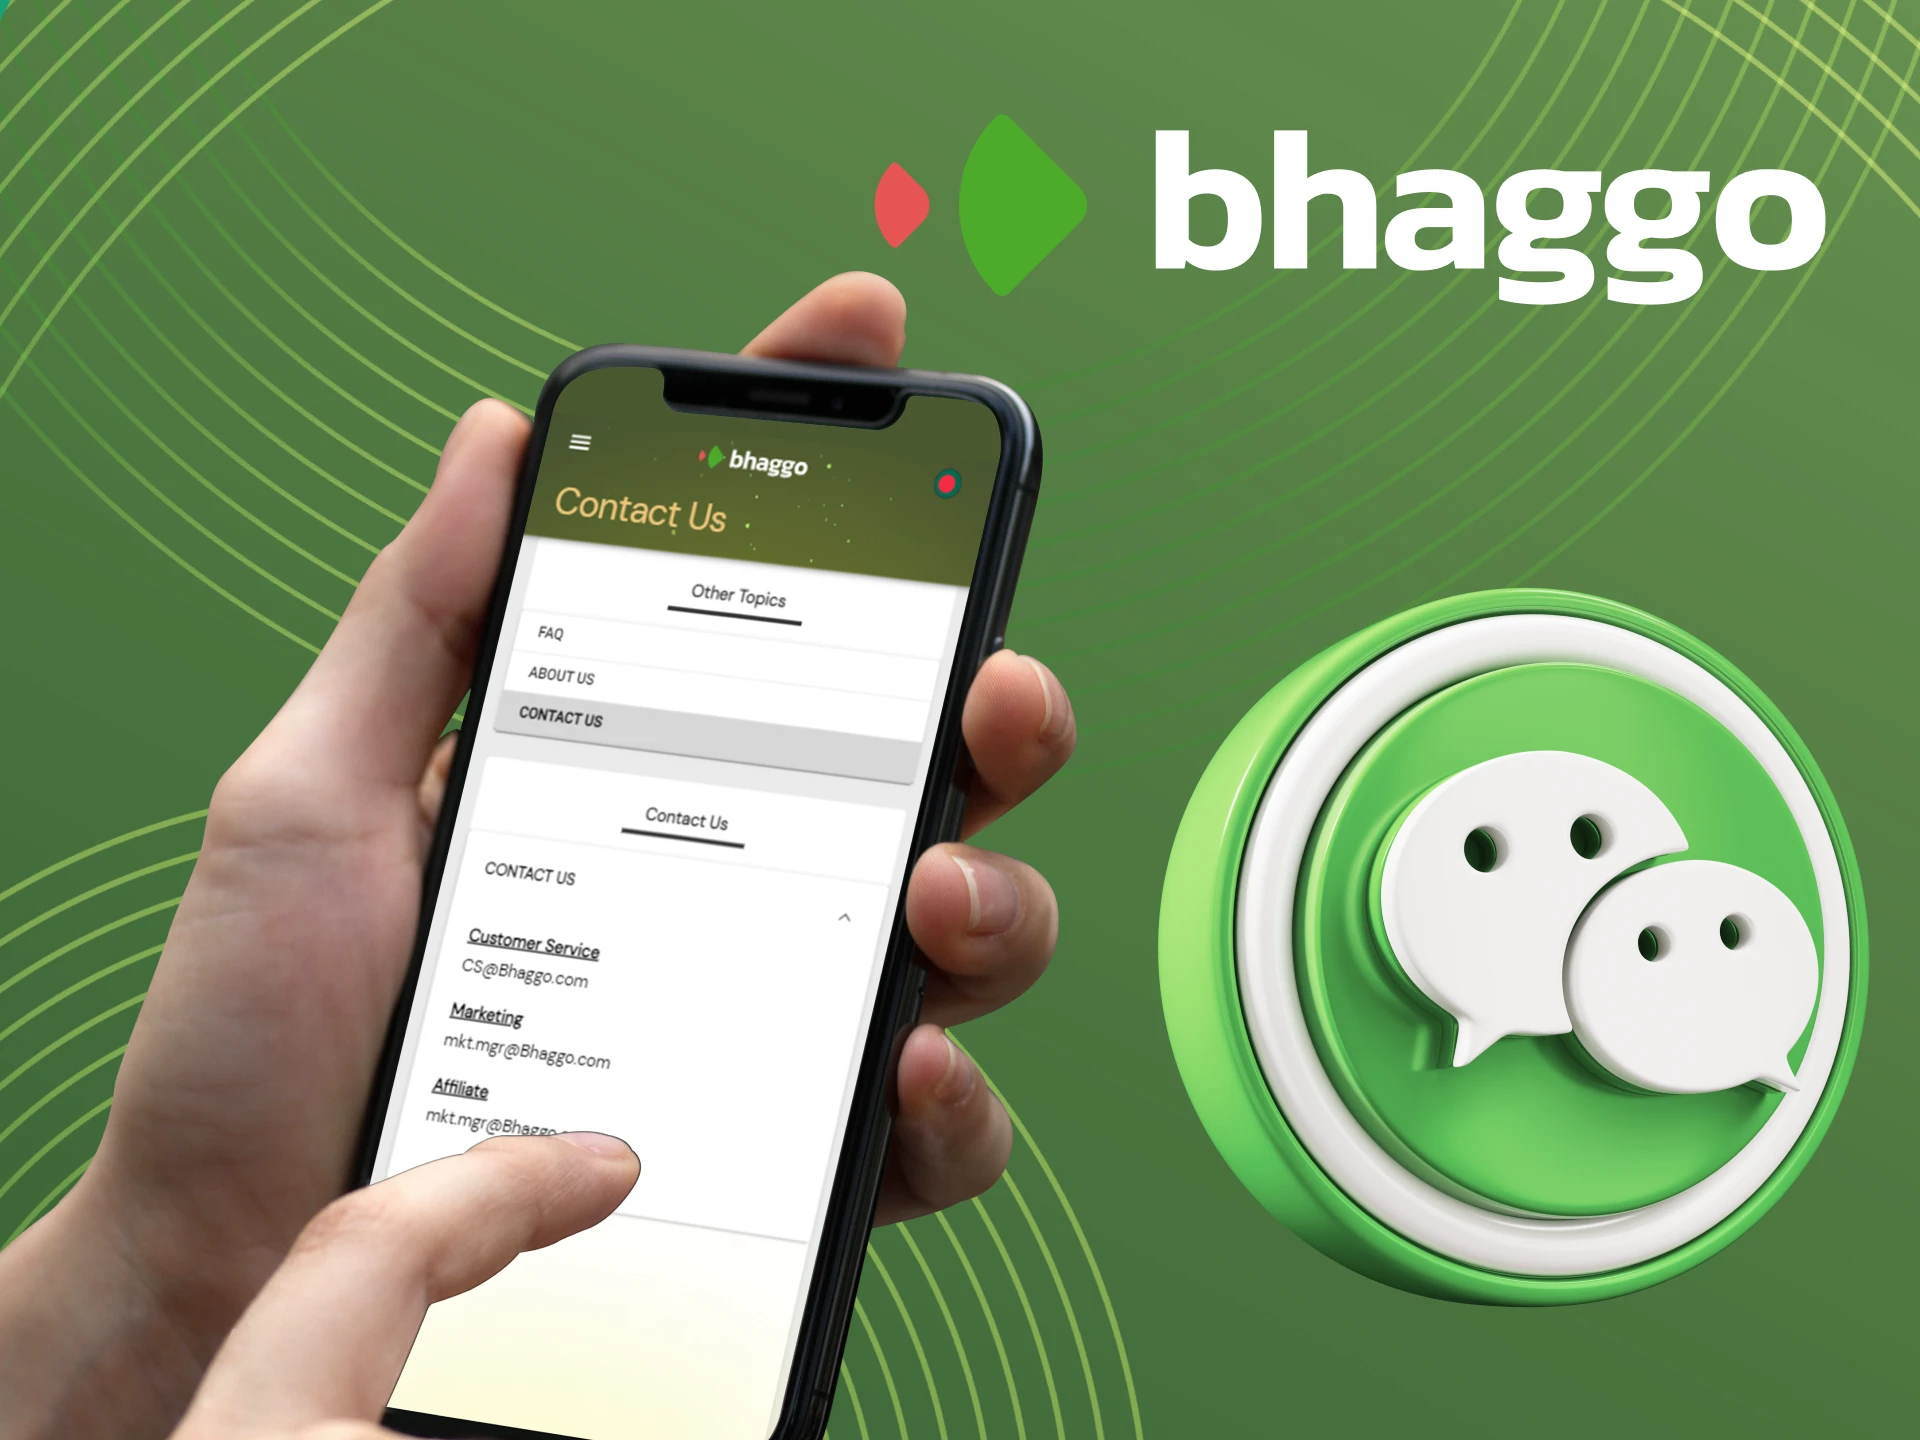 How can I contact customer support at Bhaggo Online Casino.